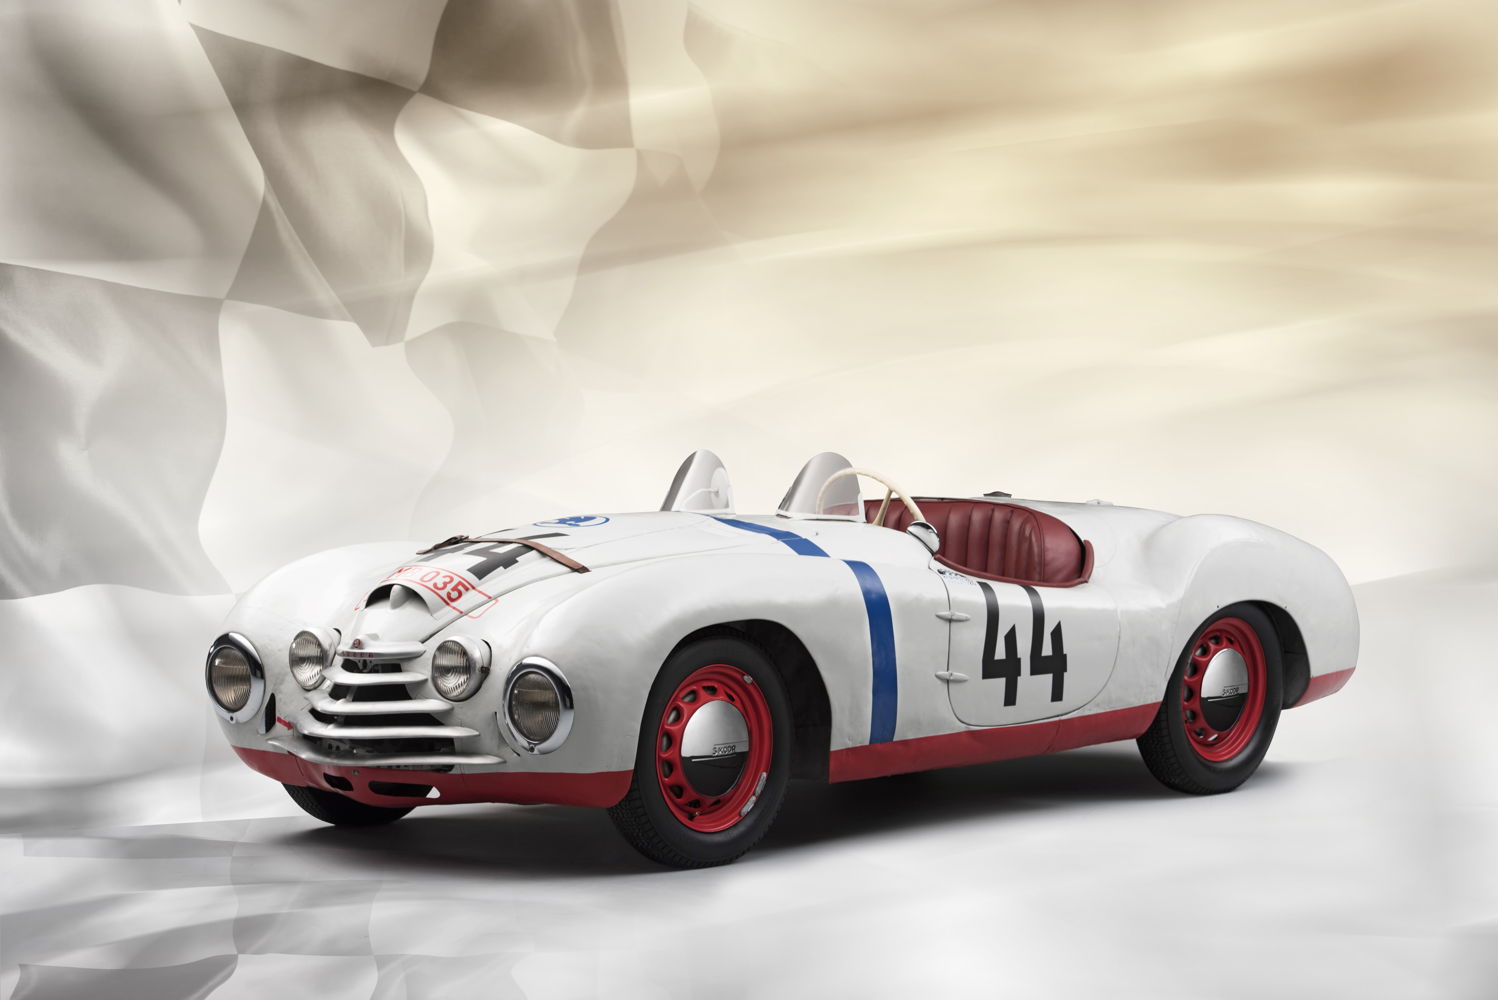 At the 18th run of the 24 hours of Le Mans
(24 – 25 June 1950), the ŠKODA Sport factory team
Václav Bobek and Jaroslav Netušil, briefly held second
place in the cubic capacity class up to 1,100cc. In the
special performance efficiency classification, the duo
took fifth place out of a total of 60 cars that started.